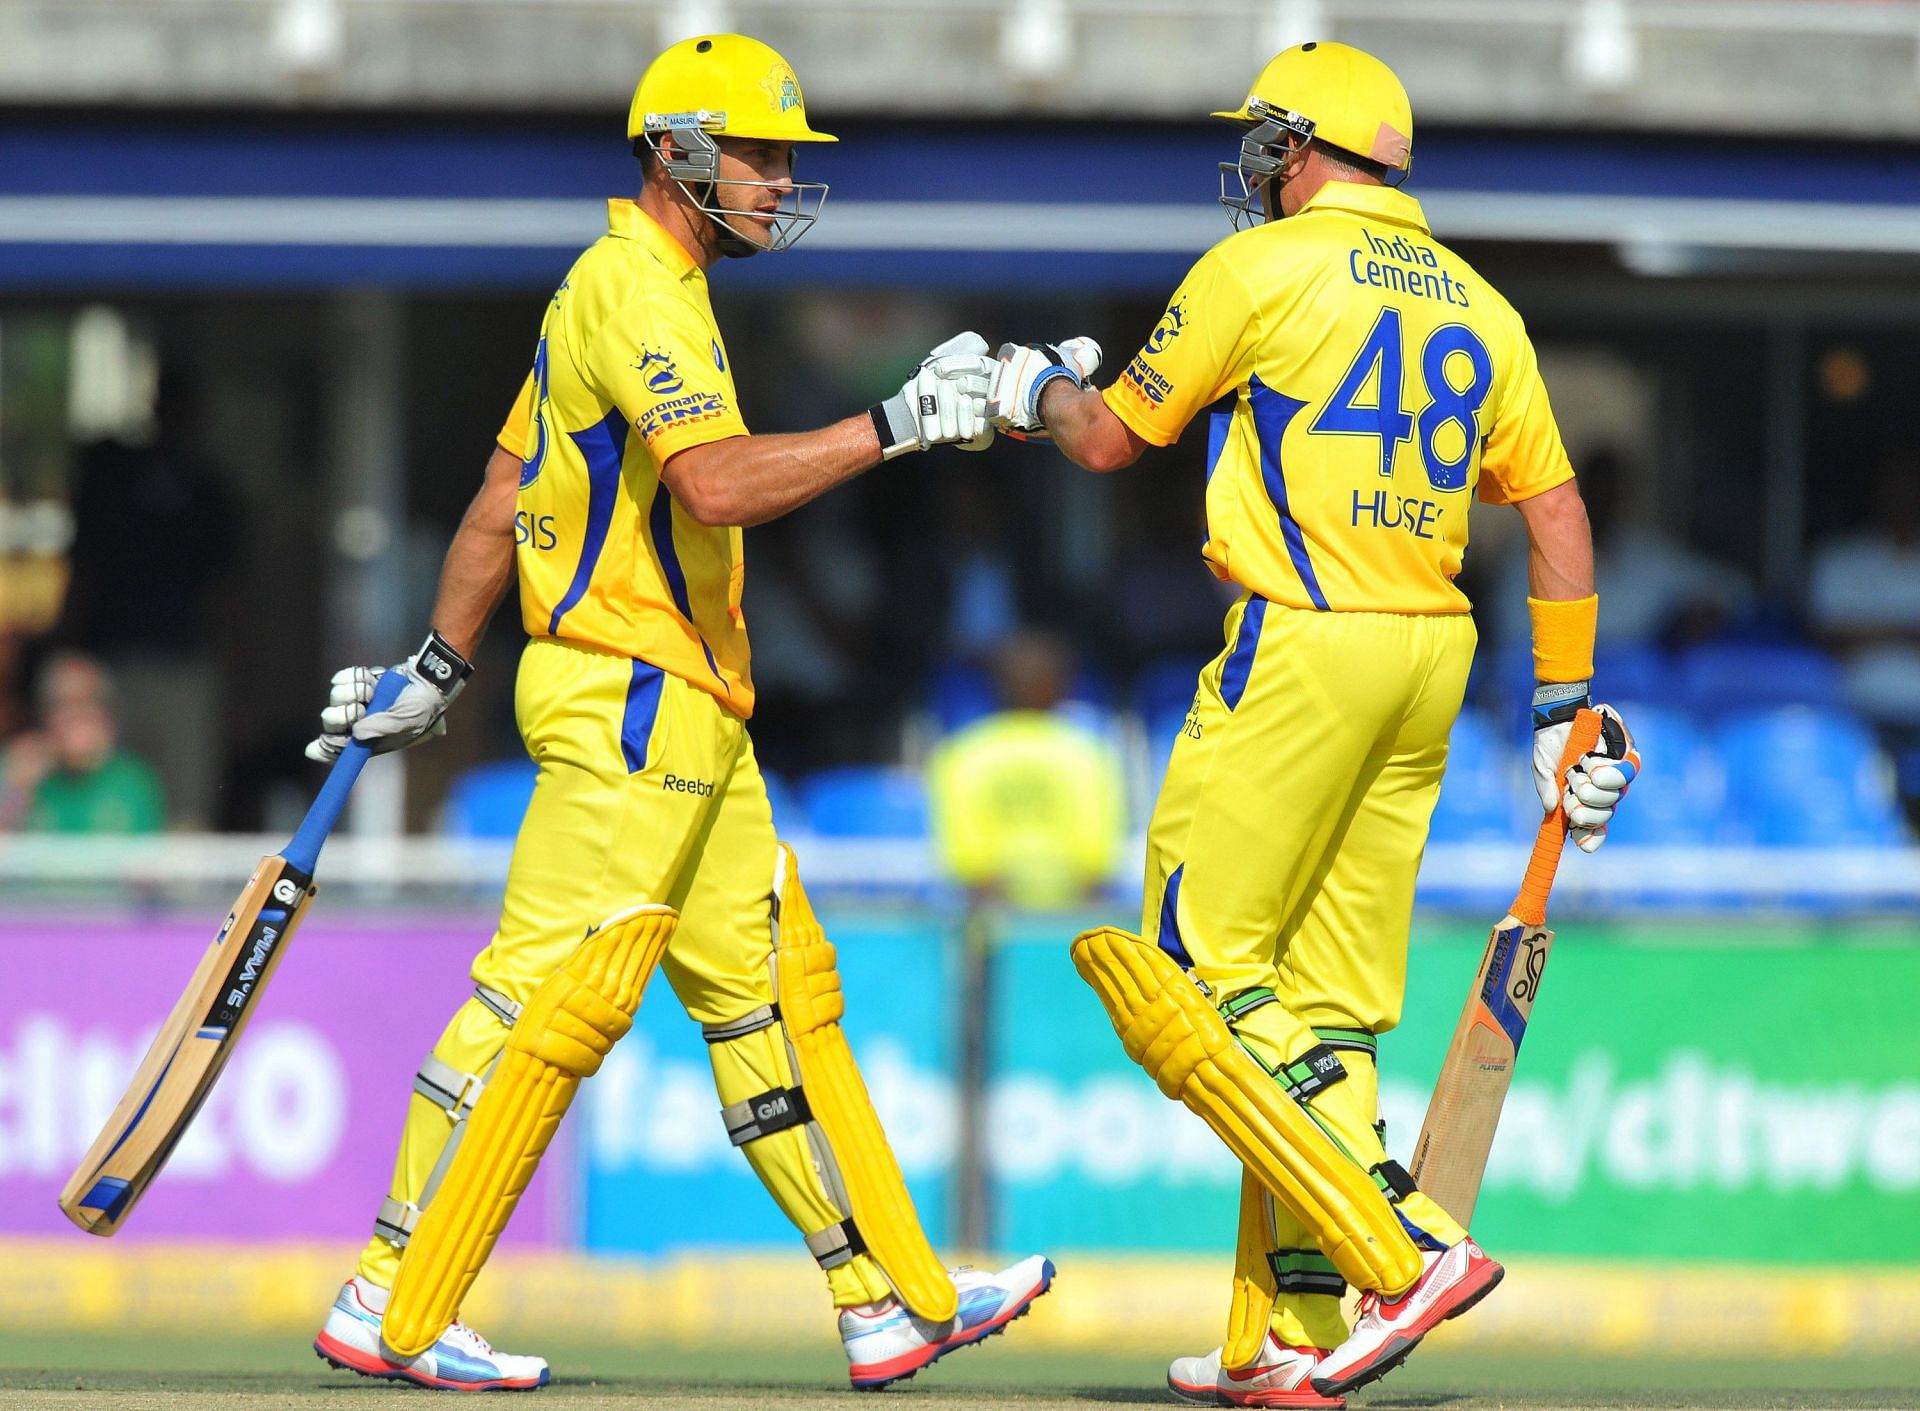 Faf du Plessis and Mike Hussey batting for CSK. Pic: Getty Images